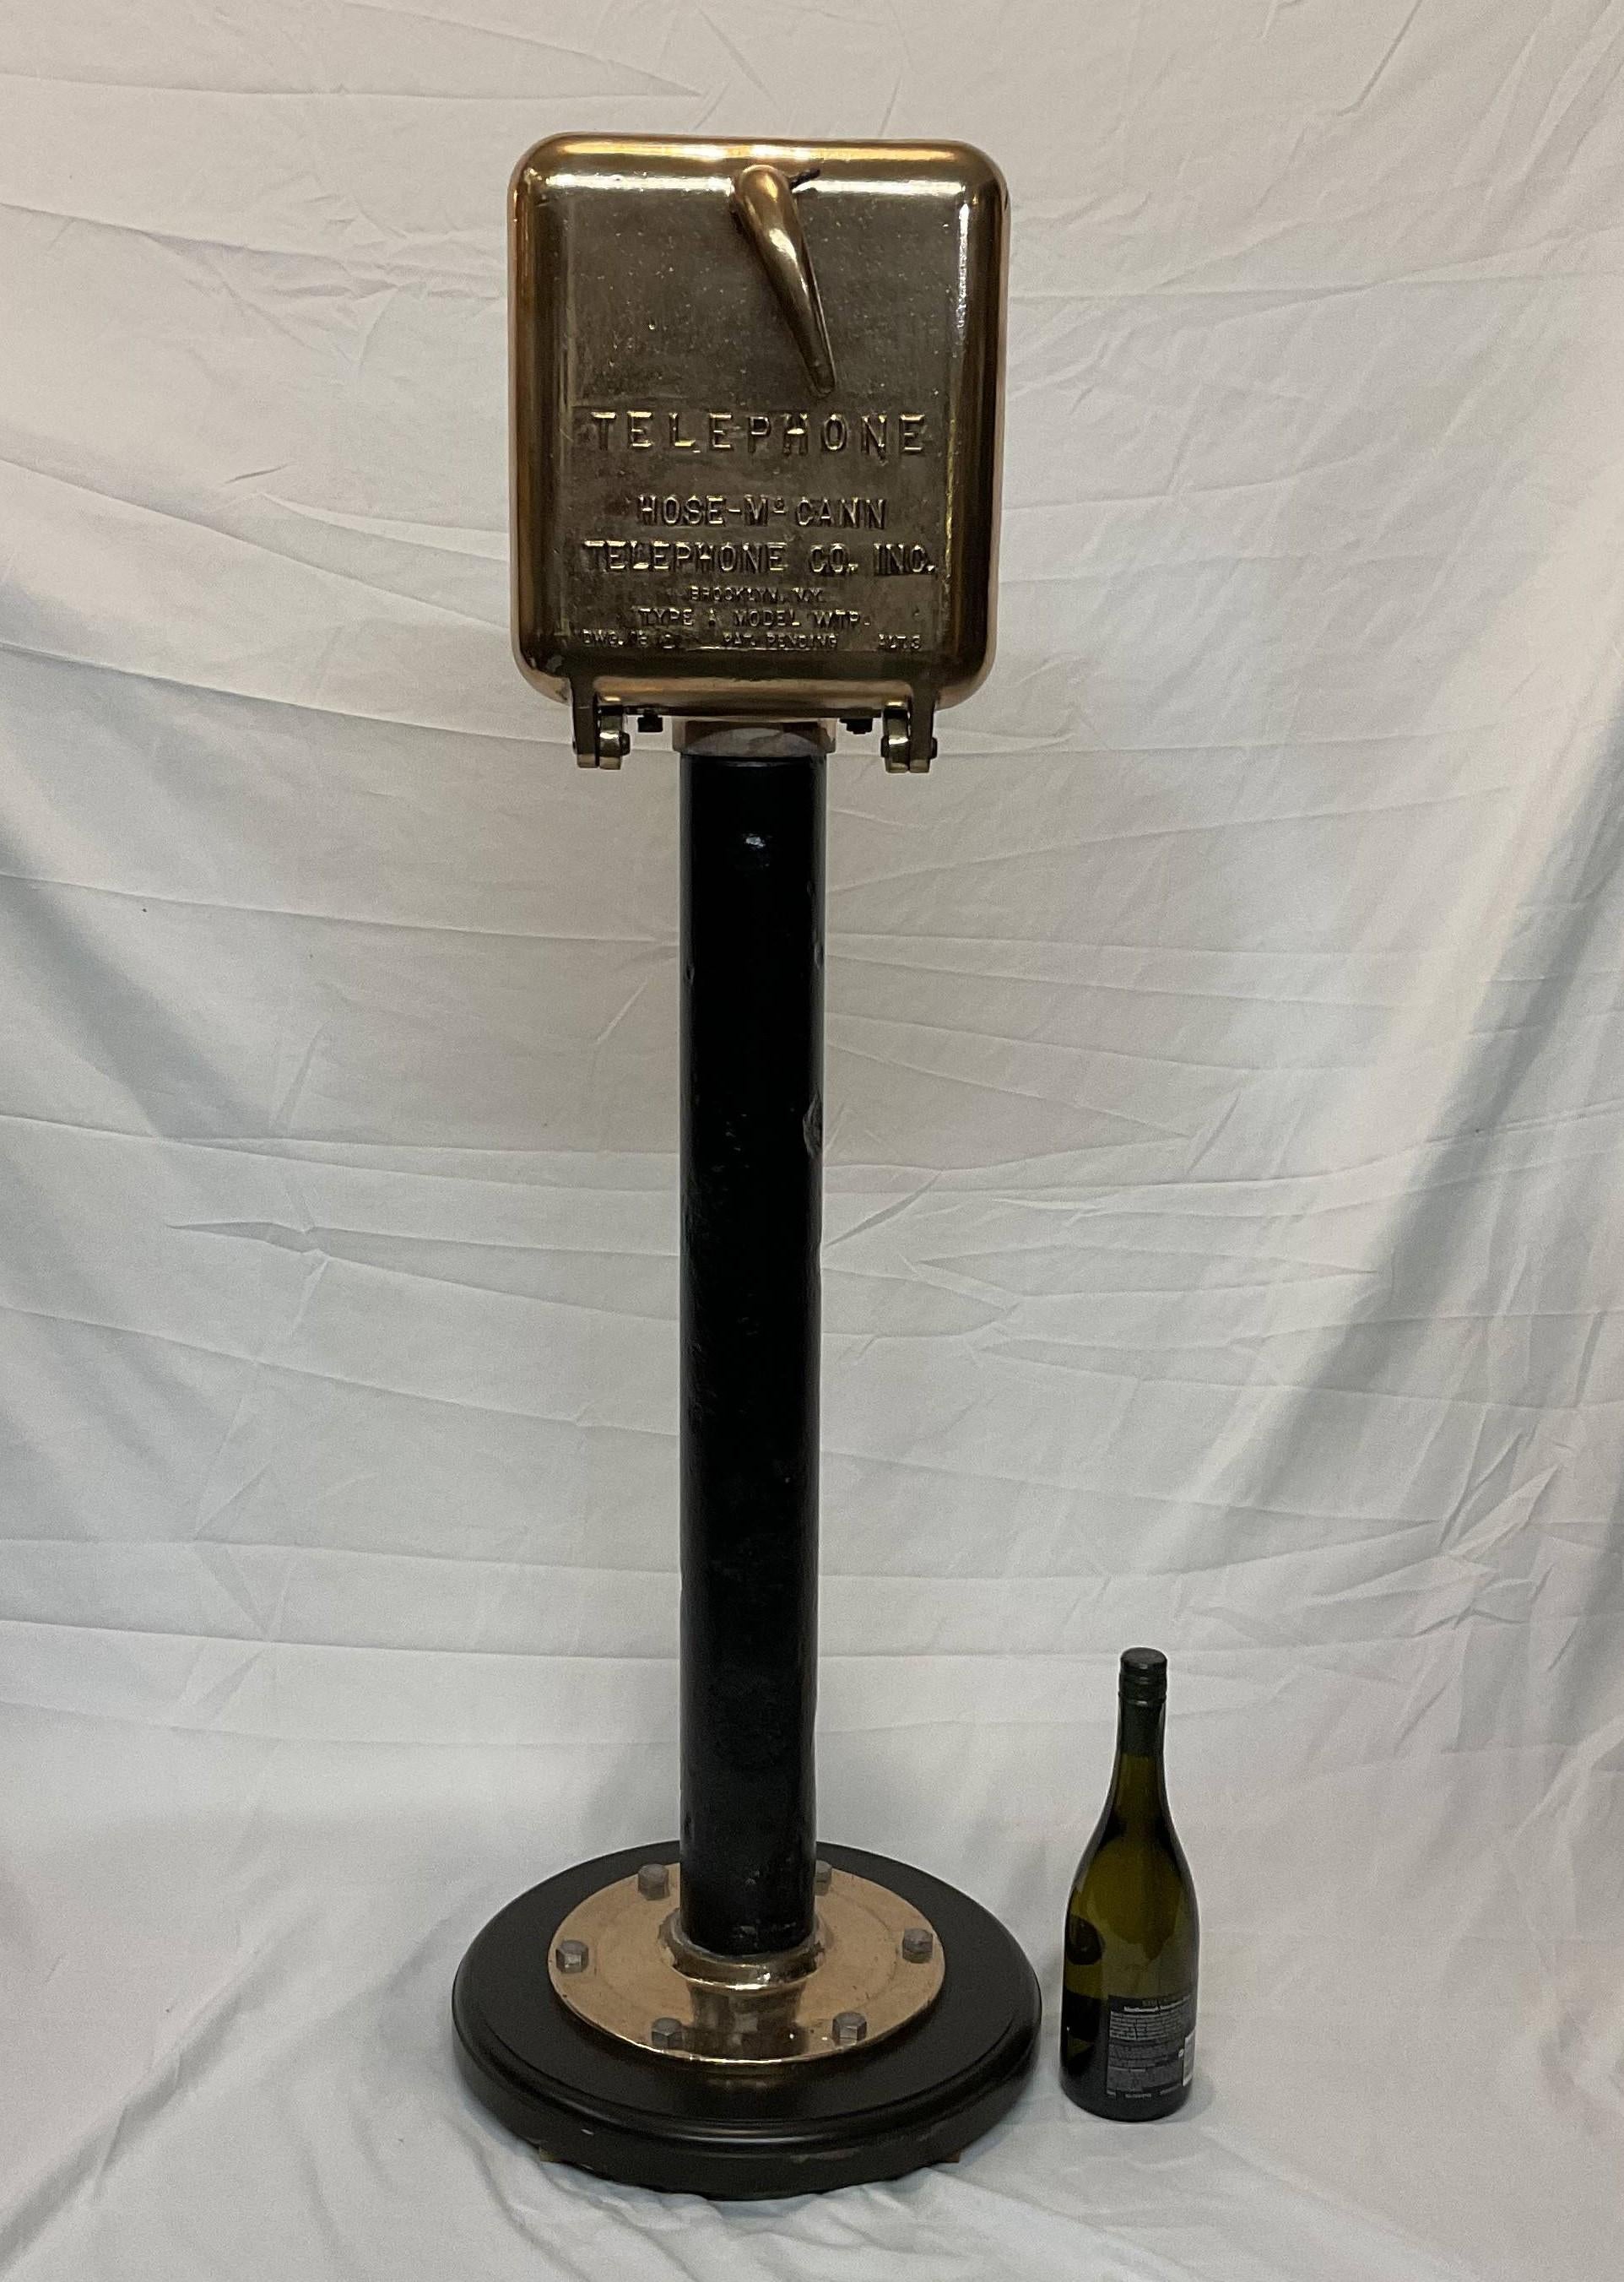 Highly polished brass ships telephone on pedestal. Meticulously polished andl lacquered head by Hose-McCann Telephone Co, Inc., Brooklyn New York. Type A, model WTP, with phone inside. 

Weight: 89 lbs.
Overall Dimensions: 47